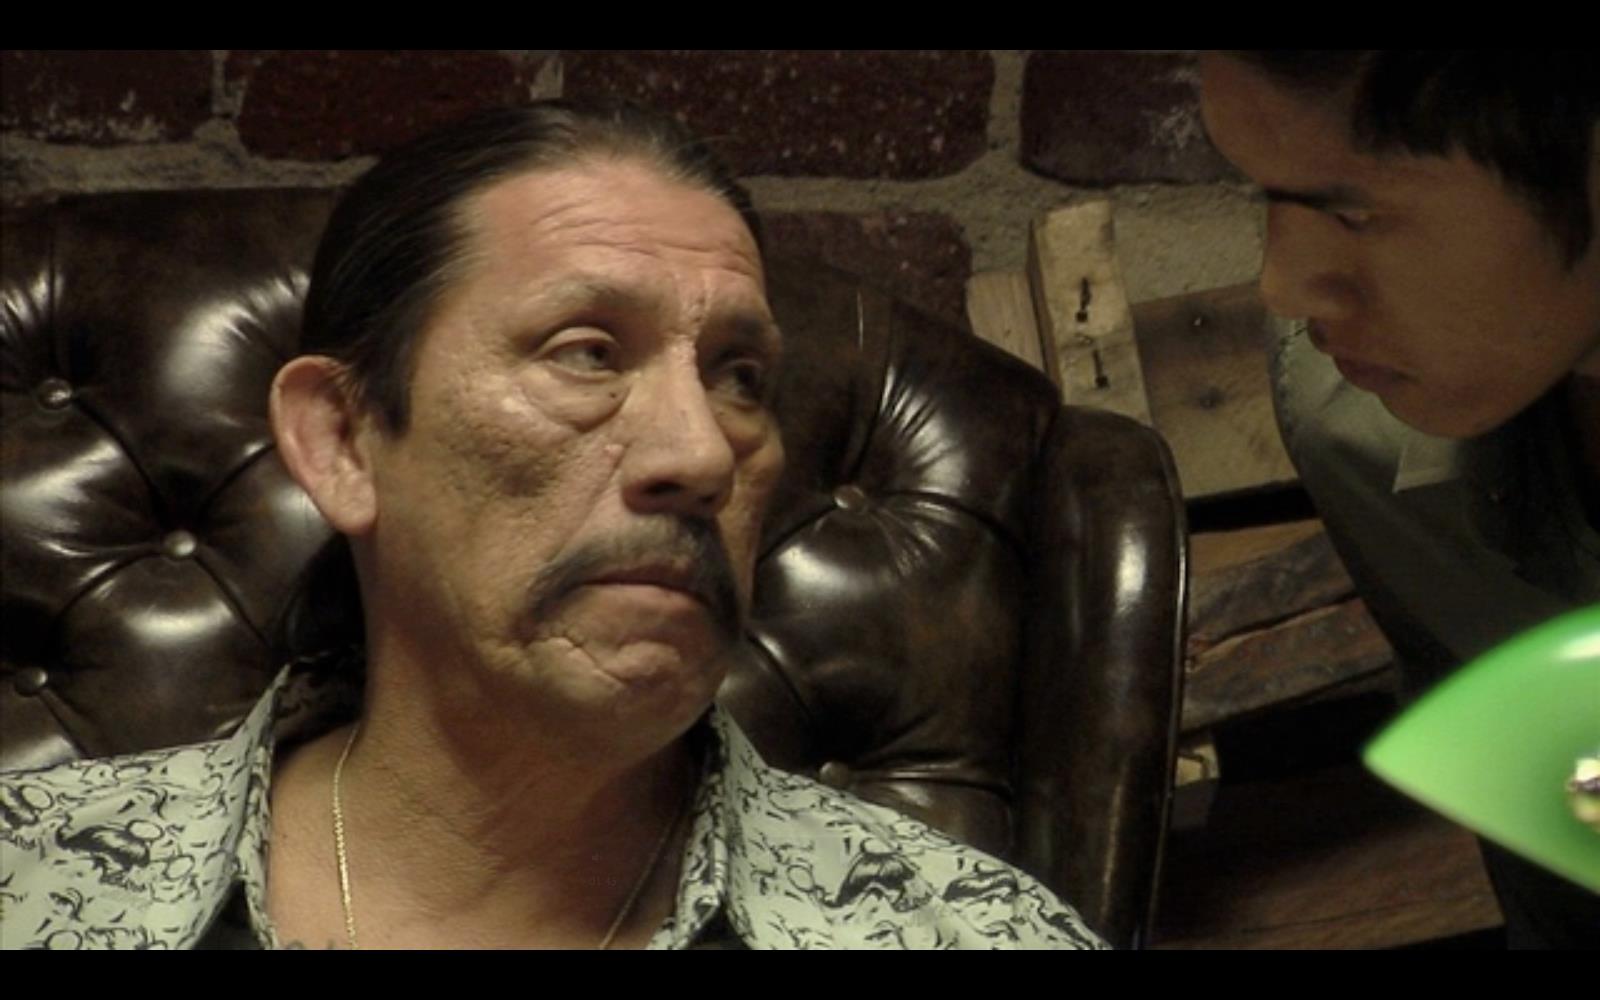 Danny Trejo on set filming 'Valley of Angels'